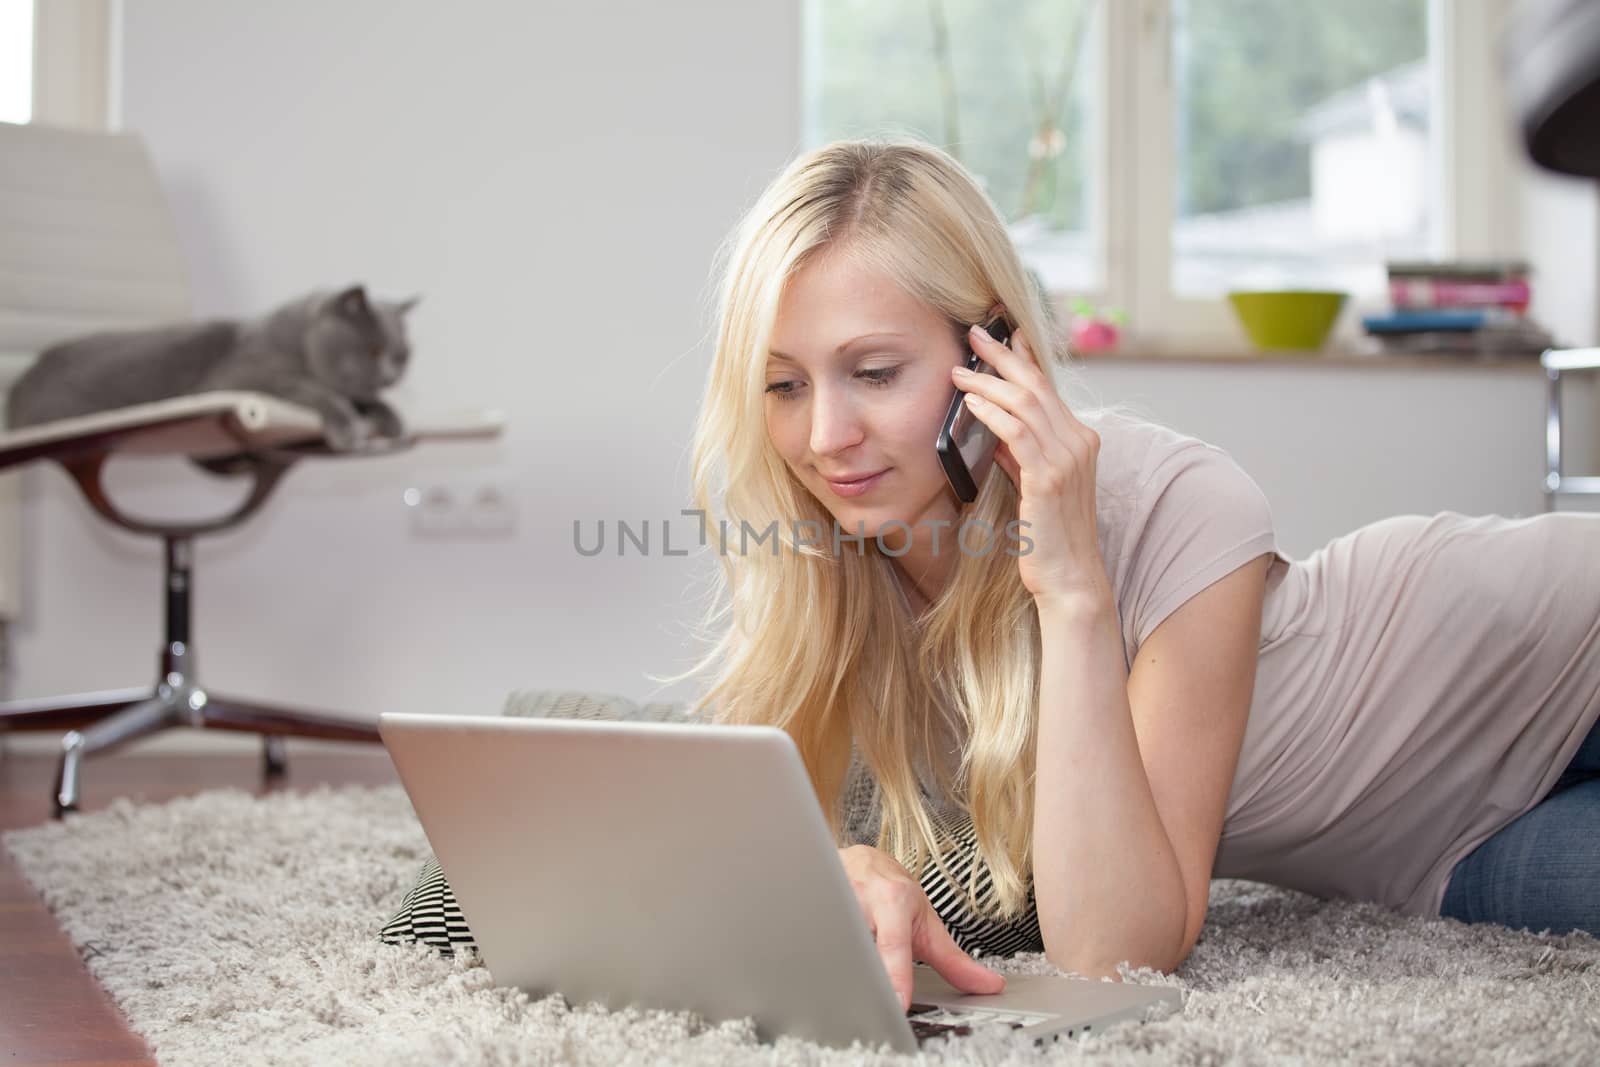 Relaxed woman is using the laptop and telephone in her livingroom, lying on the carpet